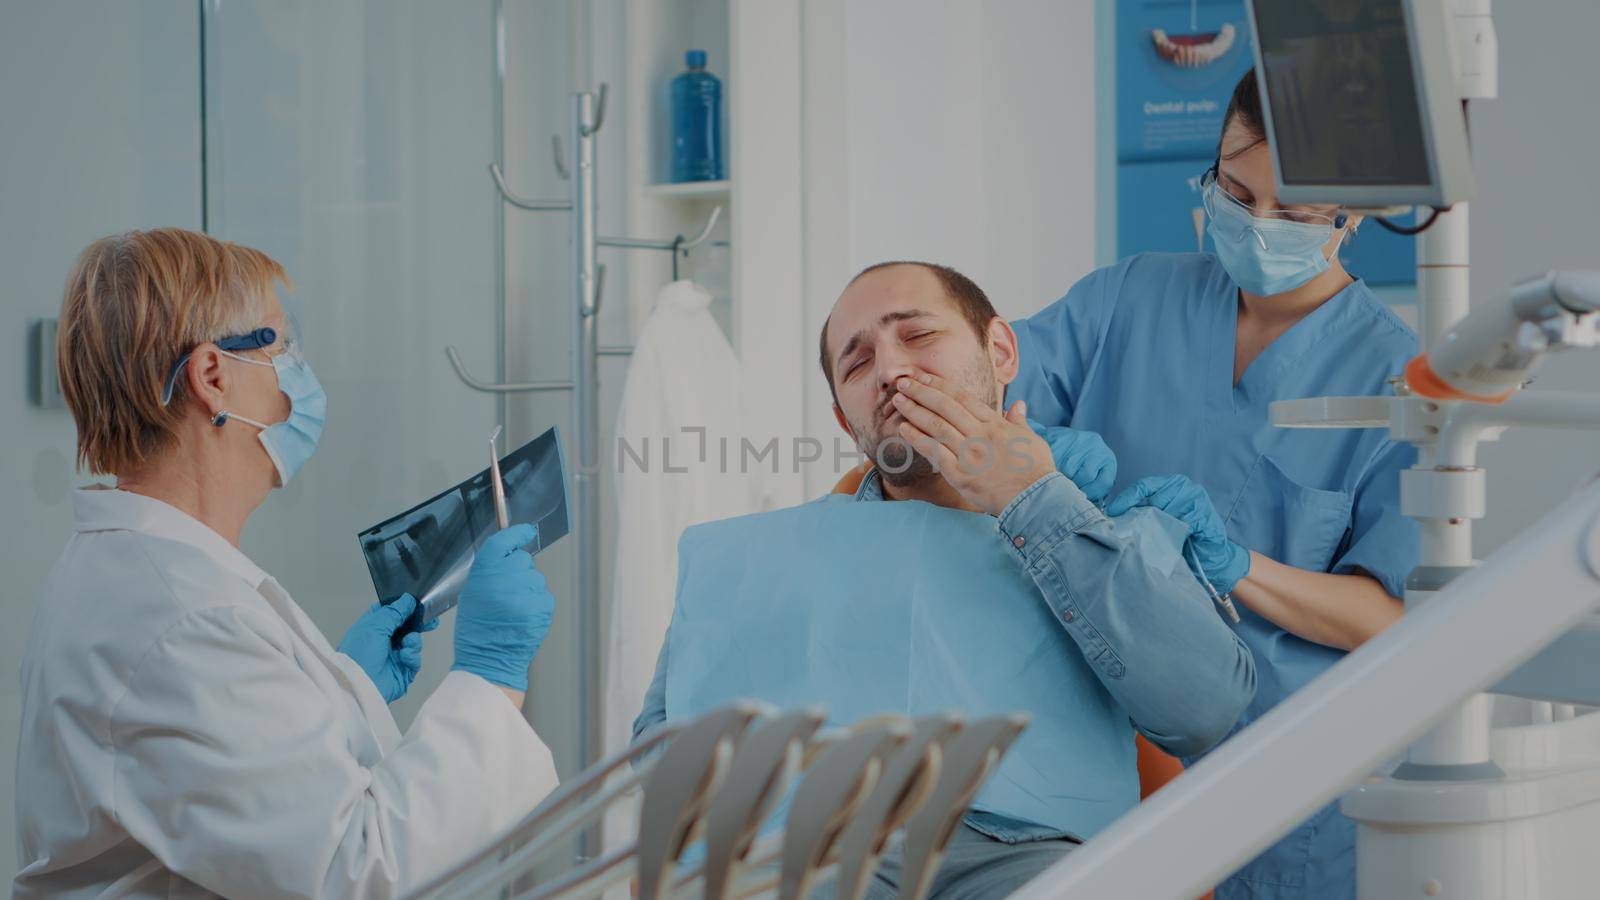 Patient complaining about toothache at stomatology consultation while dentist analyzes dental radiography to do drill procedure. Senior stomatologist treating caries for oral care.